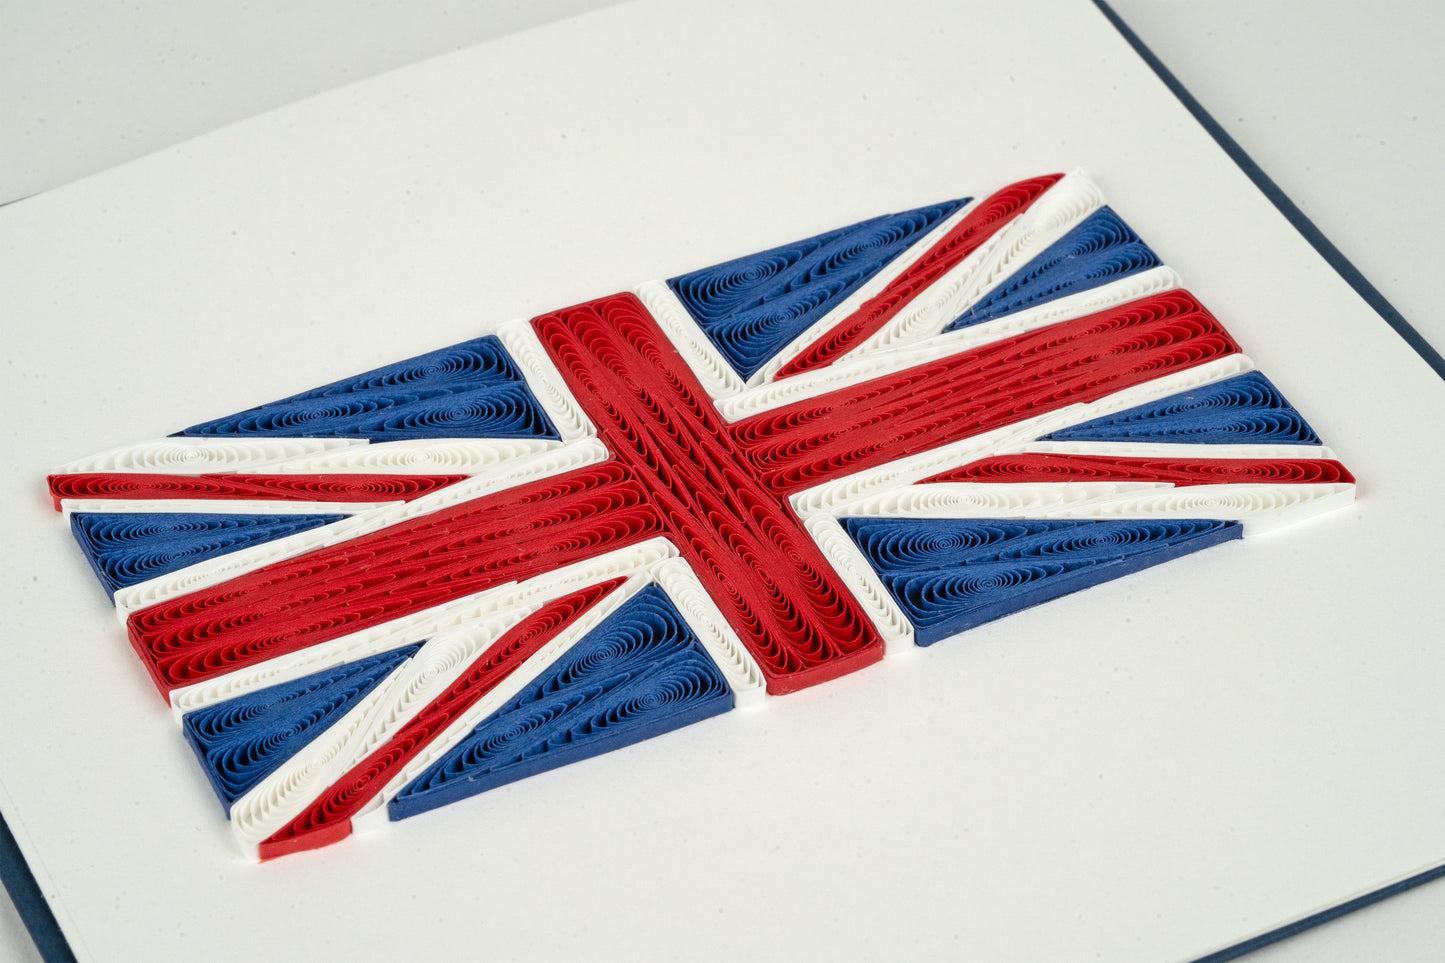 Quilling Union Jack Flag Hand-Finished Art Greeting Card